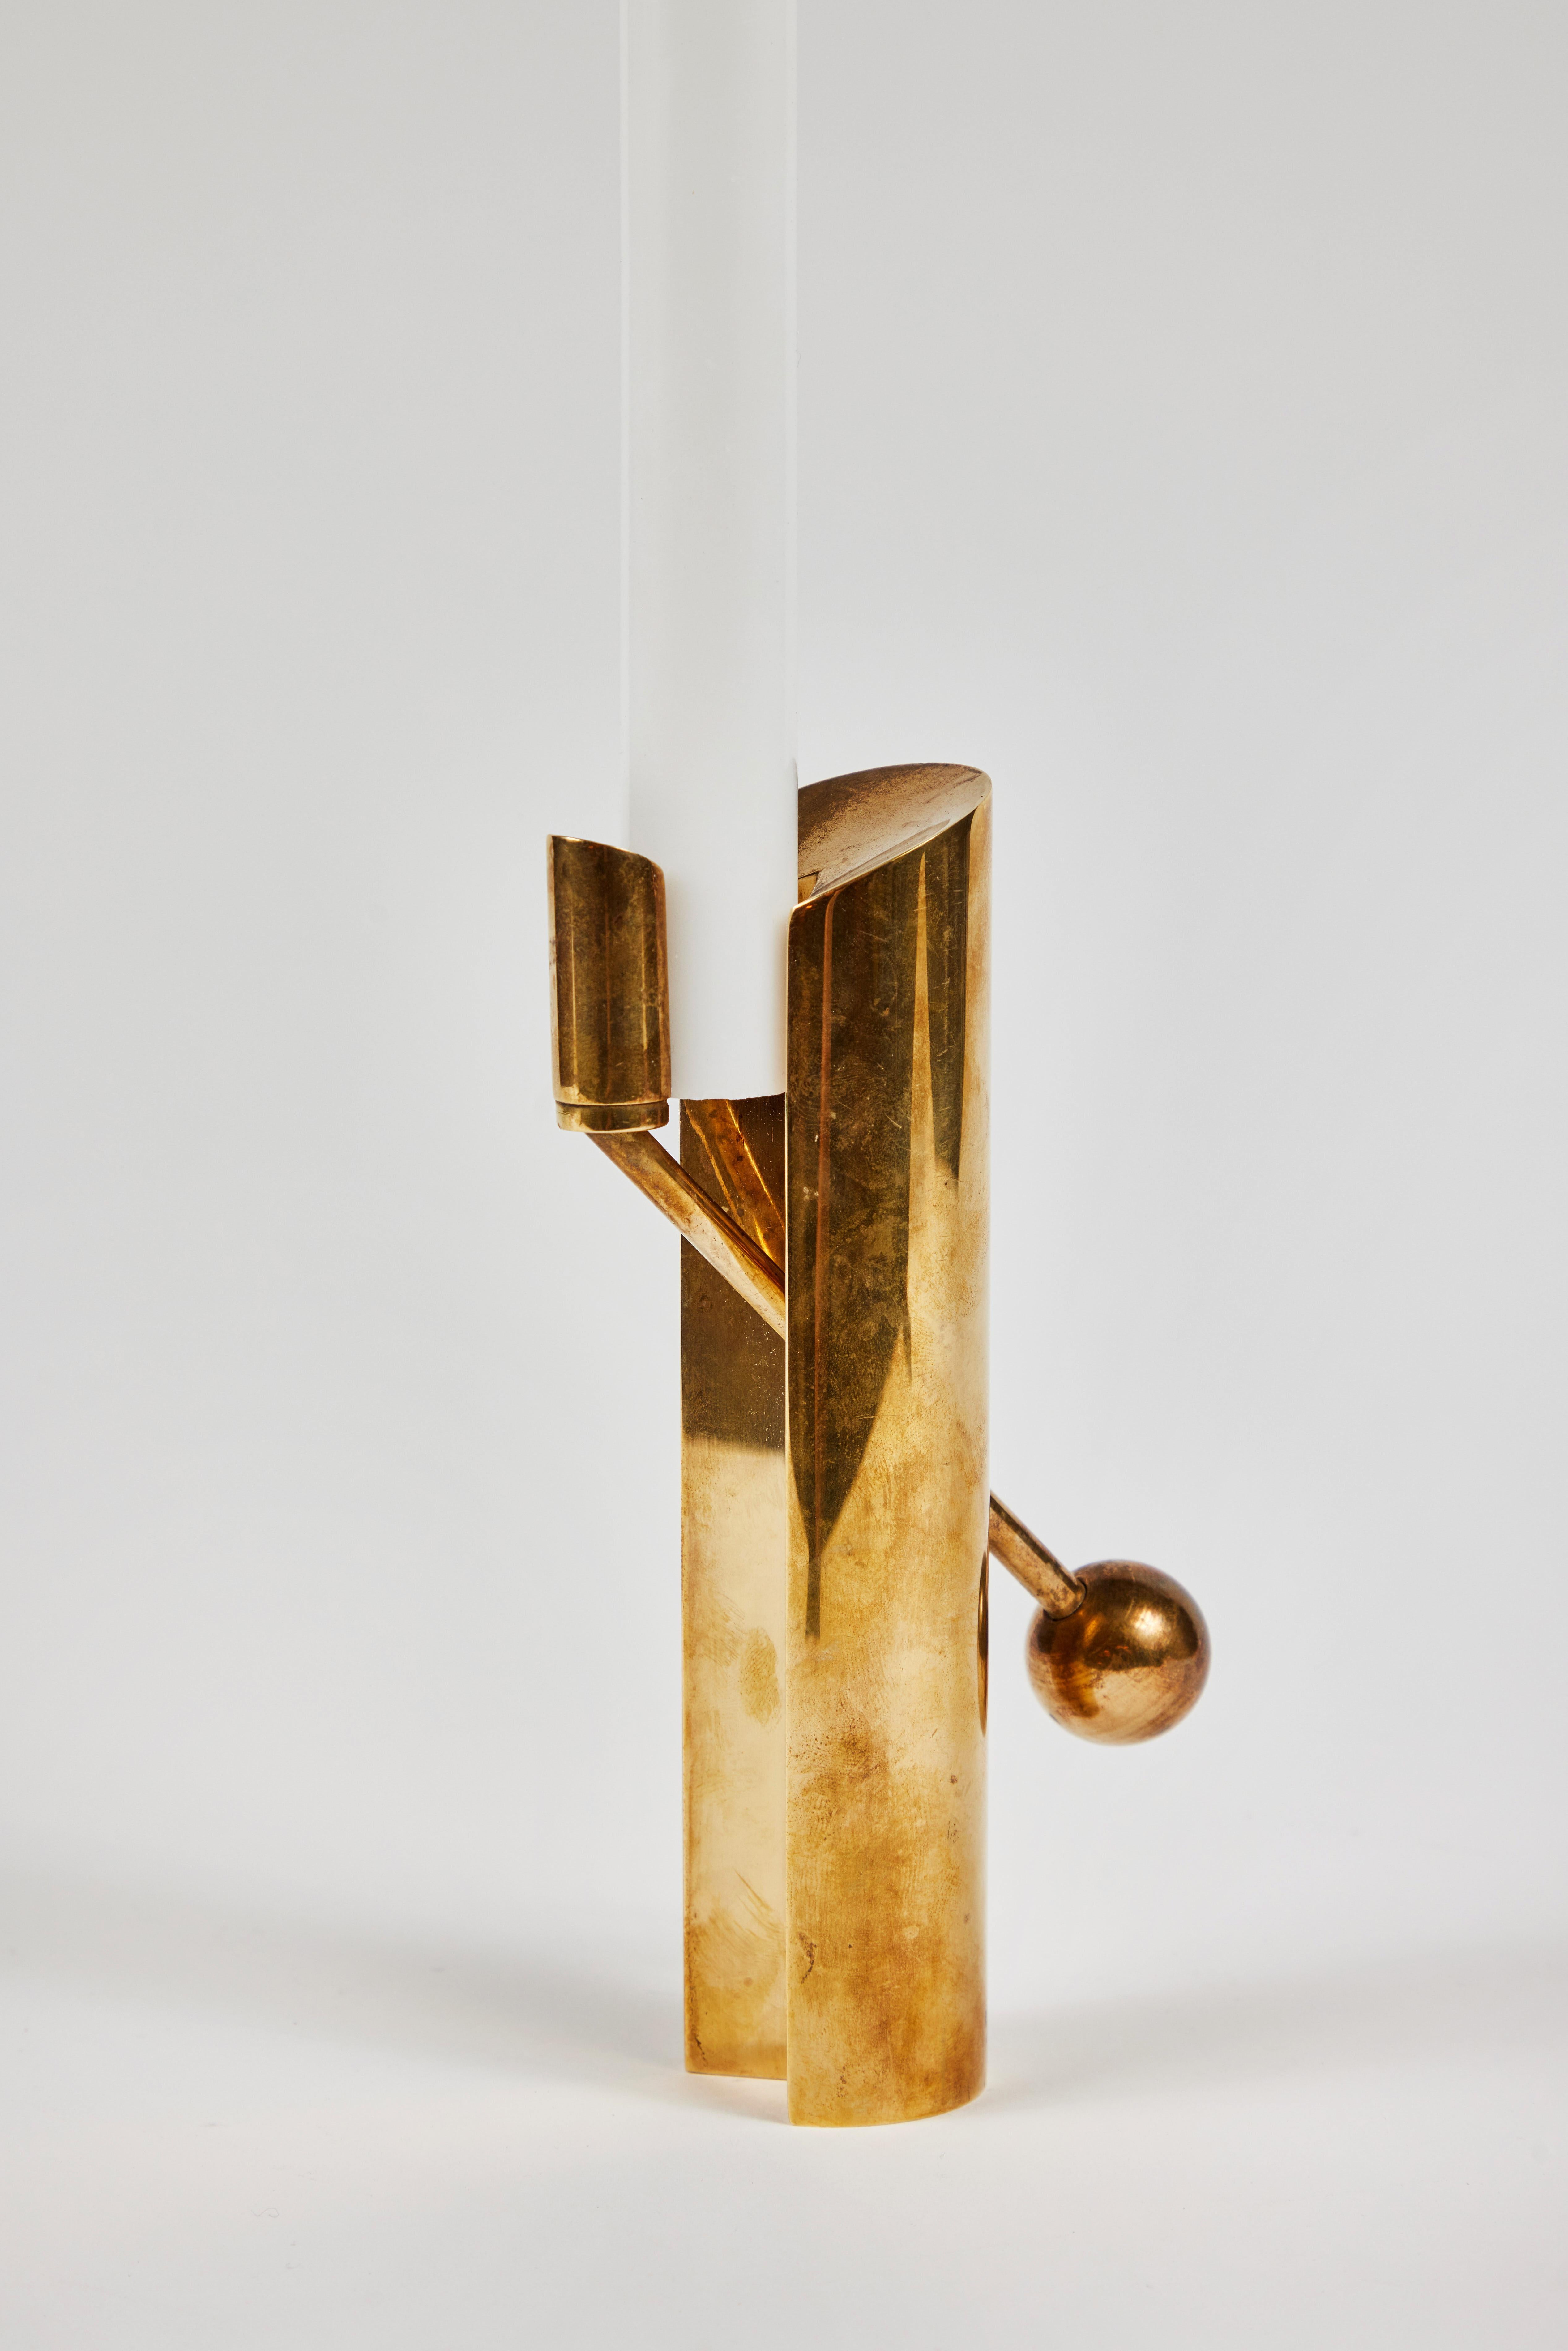 1950s Pierre Forsell Model #1607 brass candleholder for Skultuna. 

Executed in solid brass, this exquisitely refined and versatile sculptural candleholder is rightly celebrated as one of Forsell's most iconic Swedish designs. One bears original